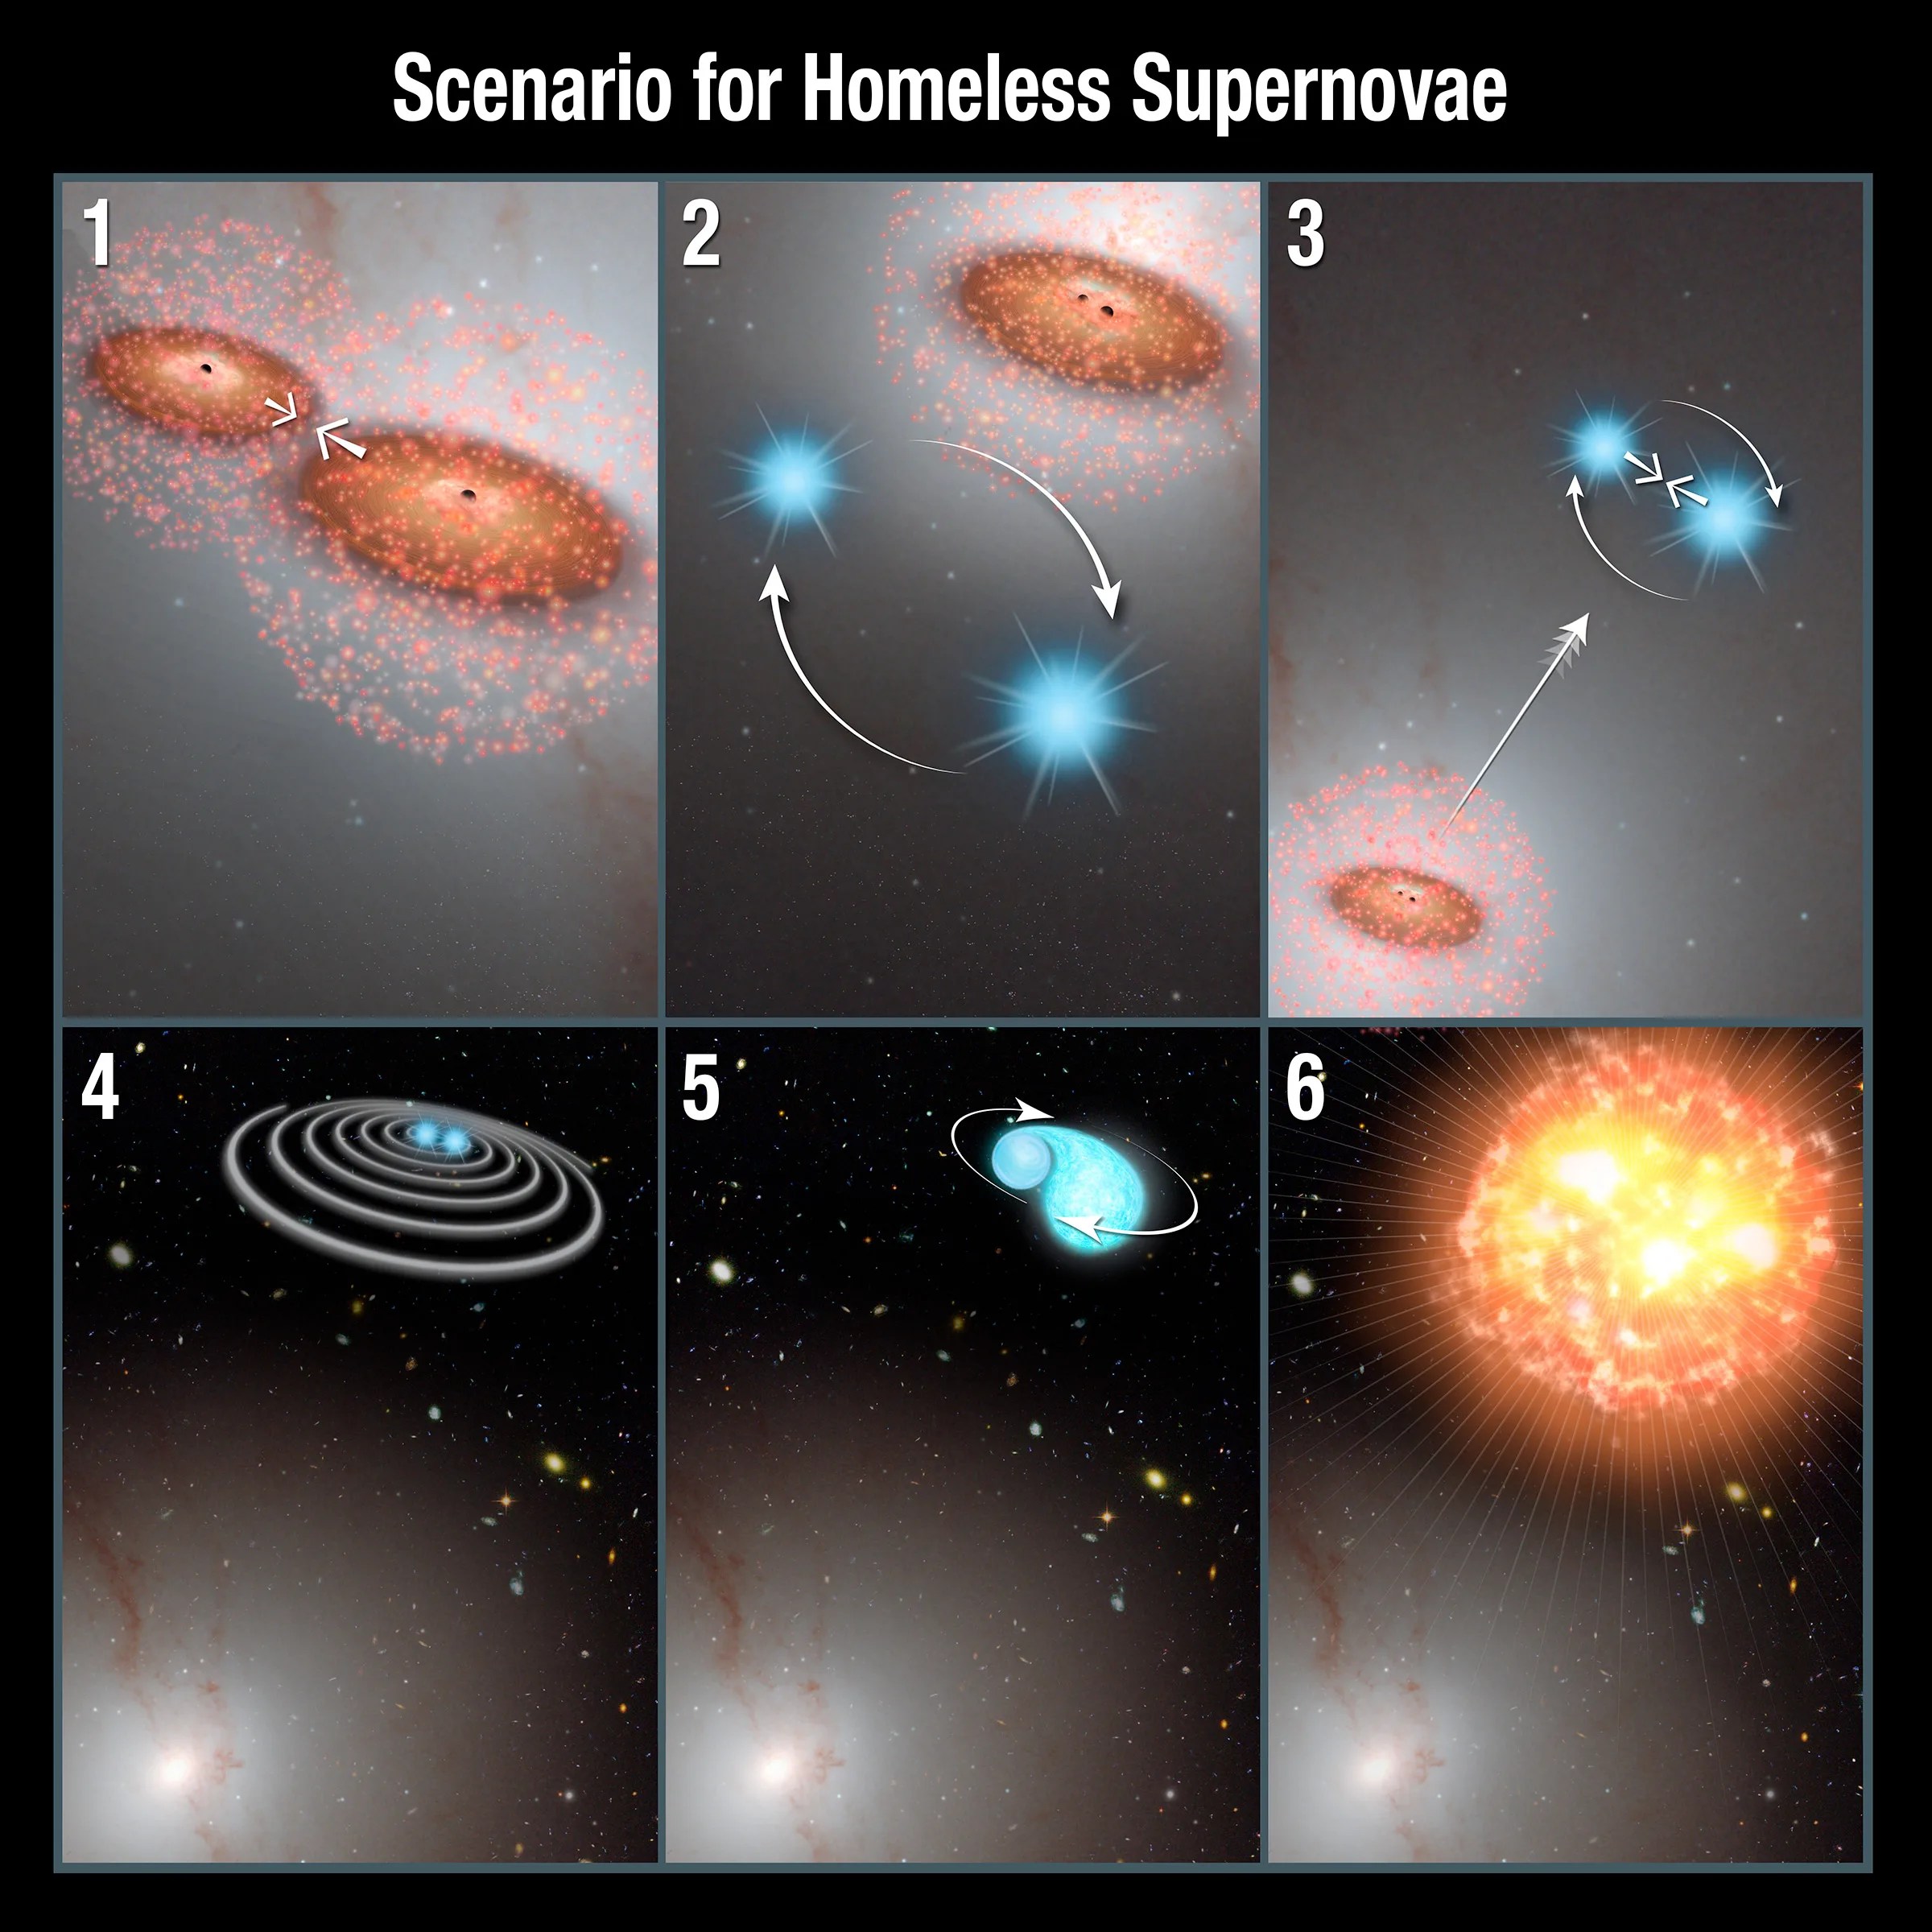 illustration offering a plausible scenario for how vagabond stars exploded as supernovae outside the confines of galaxies